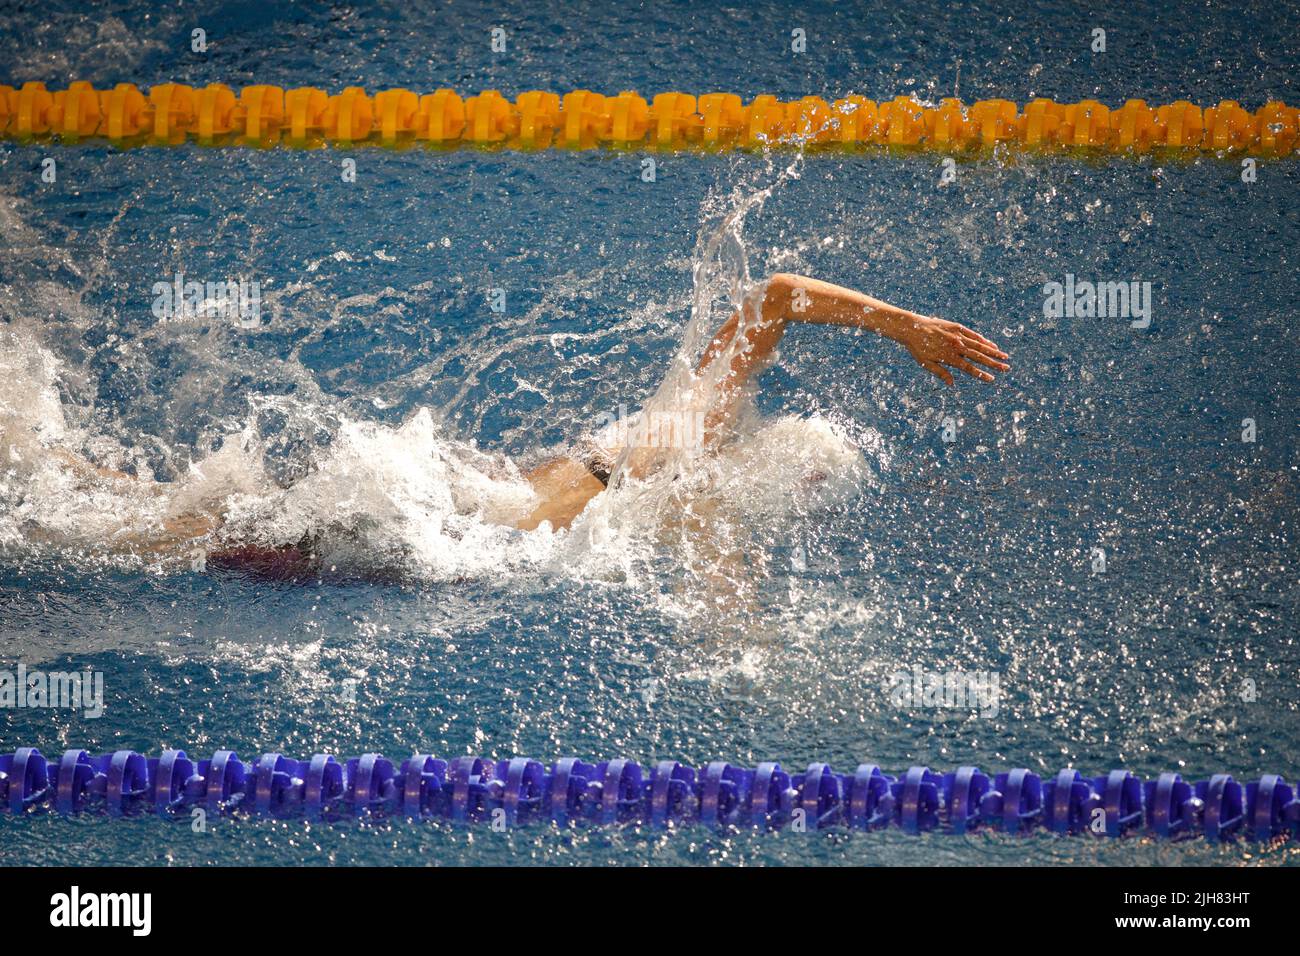 Details with a professional female athlete swimming in an olympic swimming pool. Stock Photo